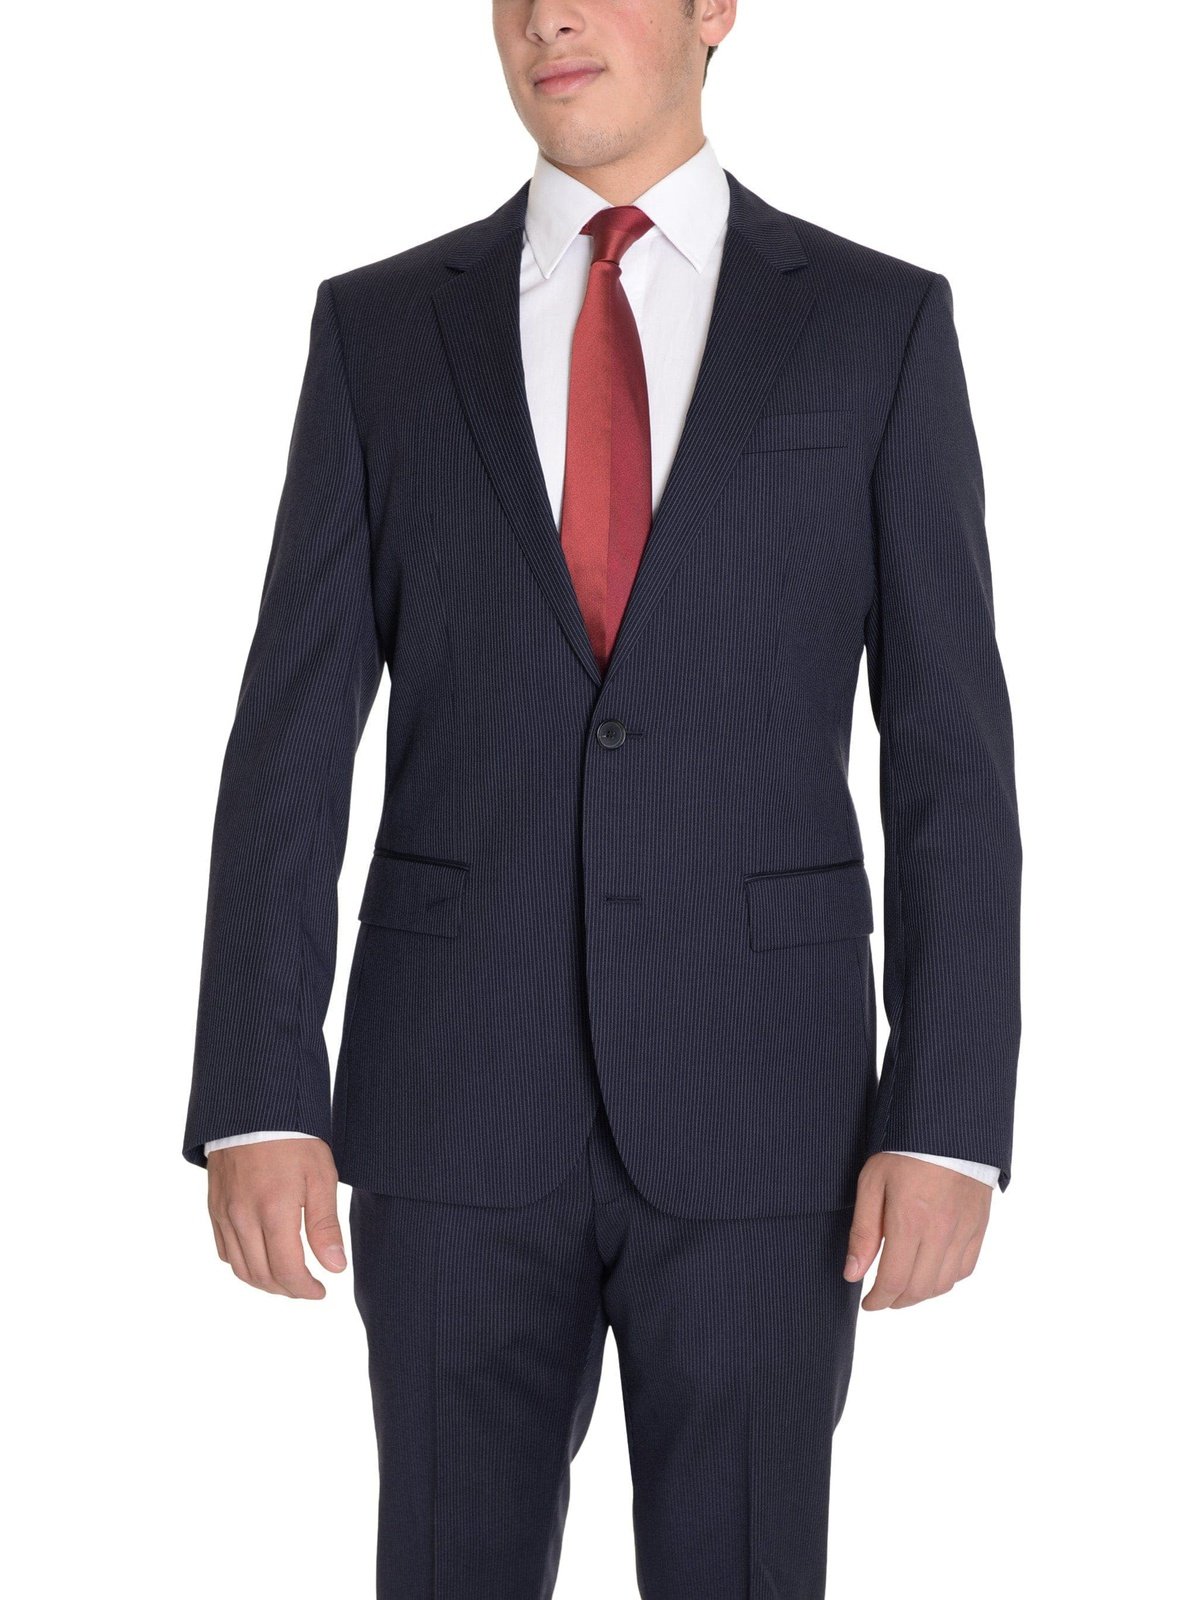 HUGO BOSS TWO PIECE SUITS Hugo Boss The Grand/central Classic Fit Navy Pinstriped Two Button Wool Suit